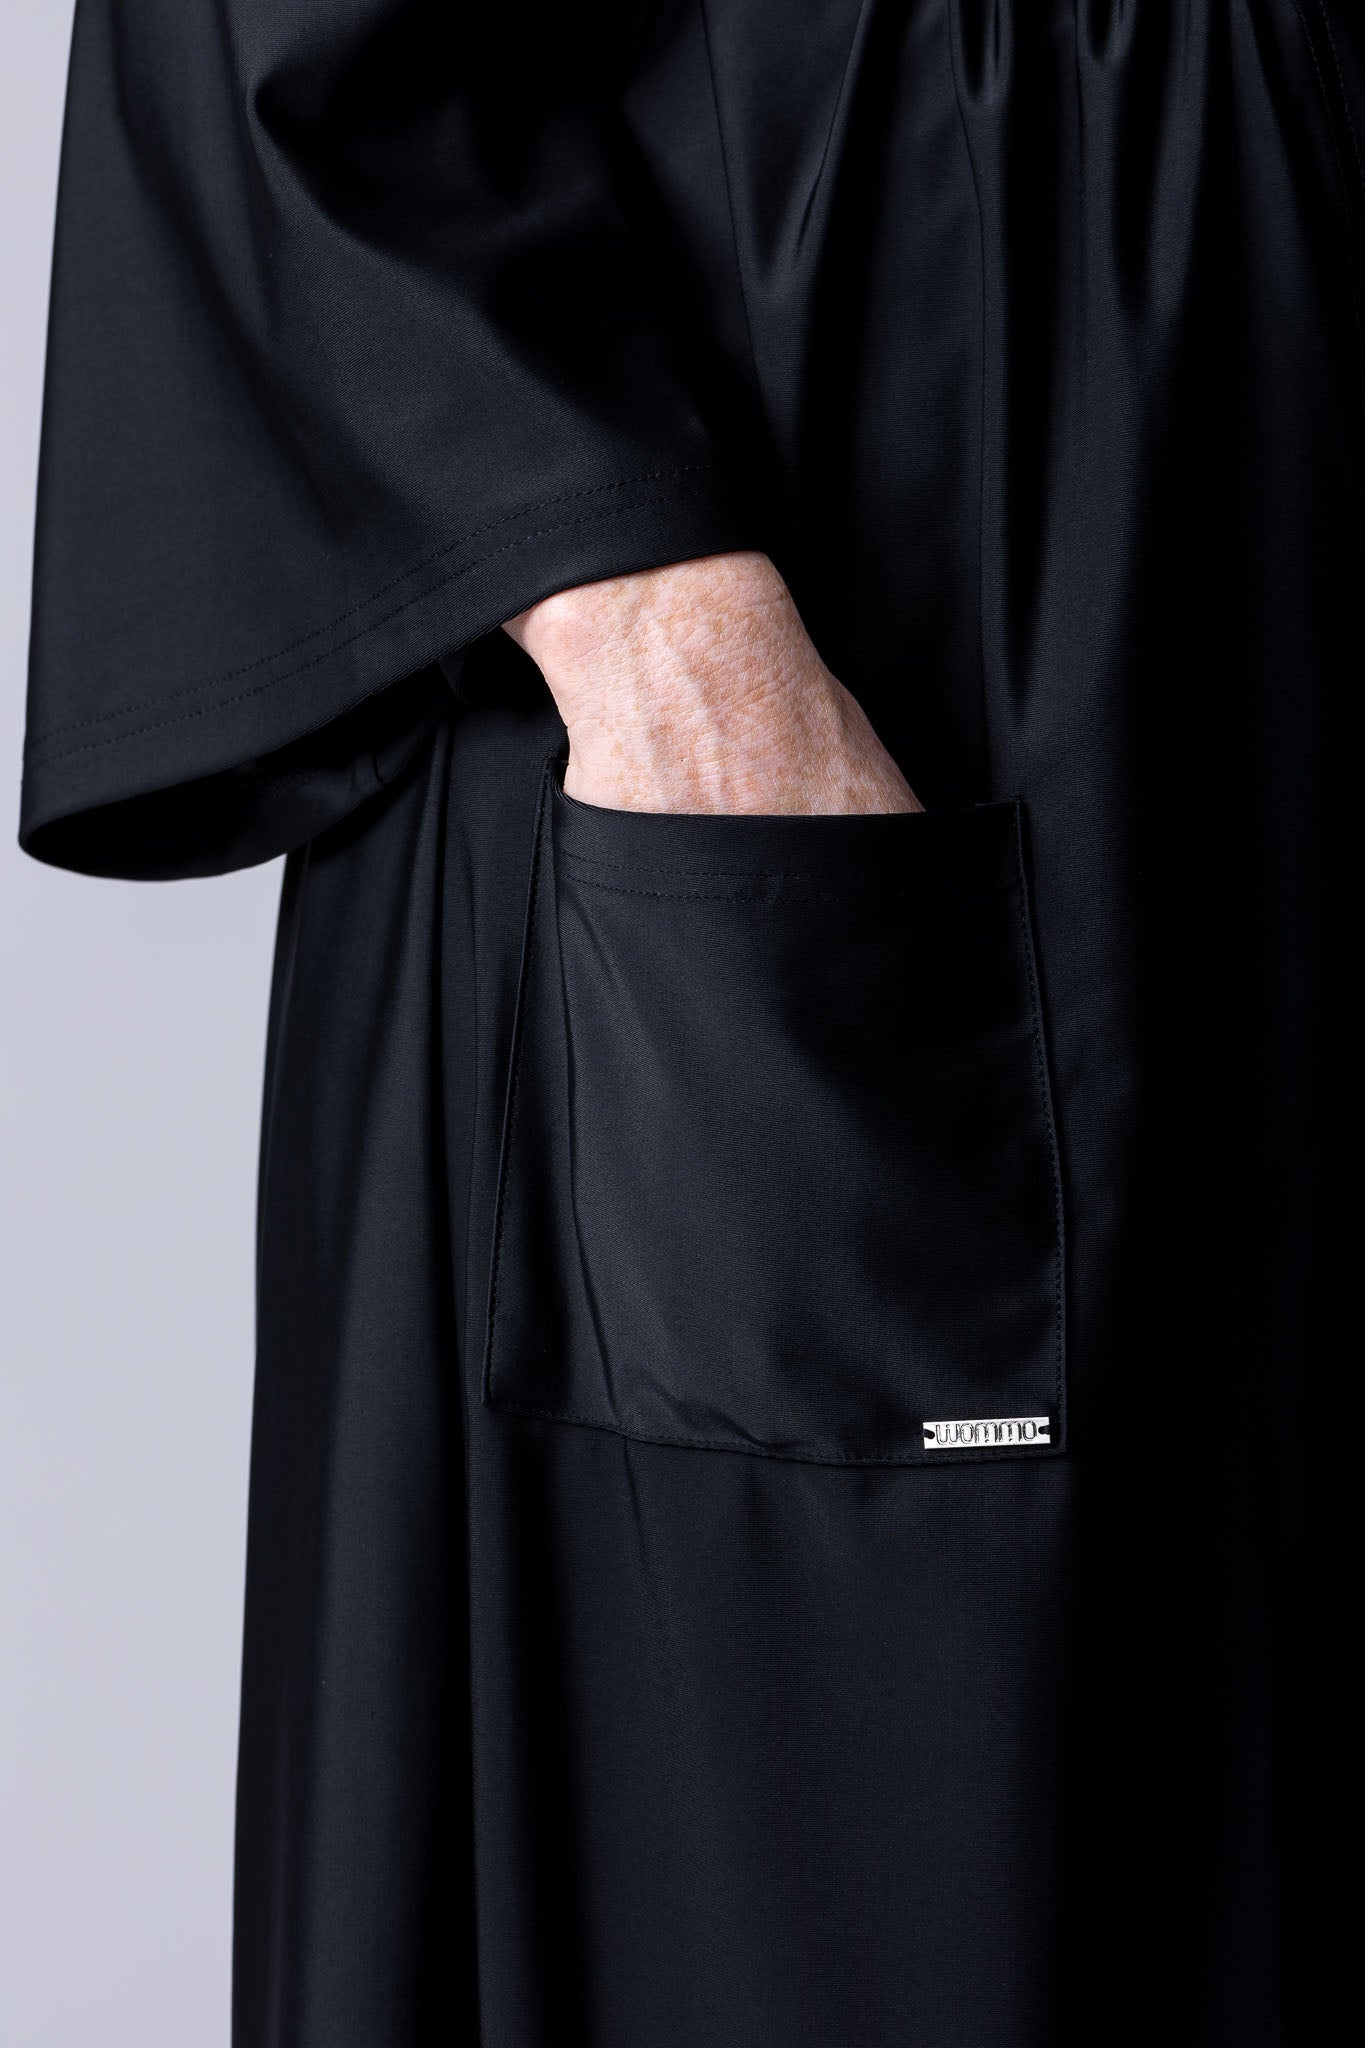 Beach Cover Up in black maxi length with pocket, belt and made of swim fabric.